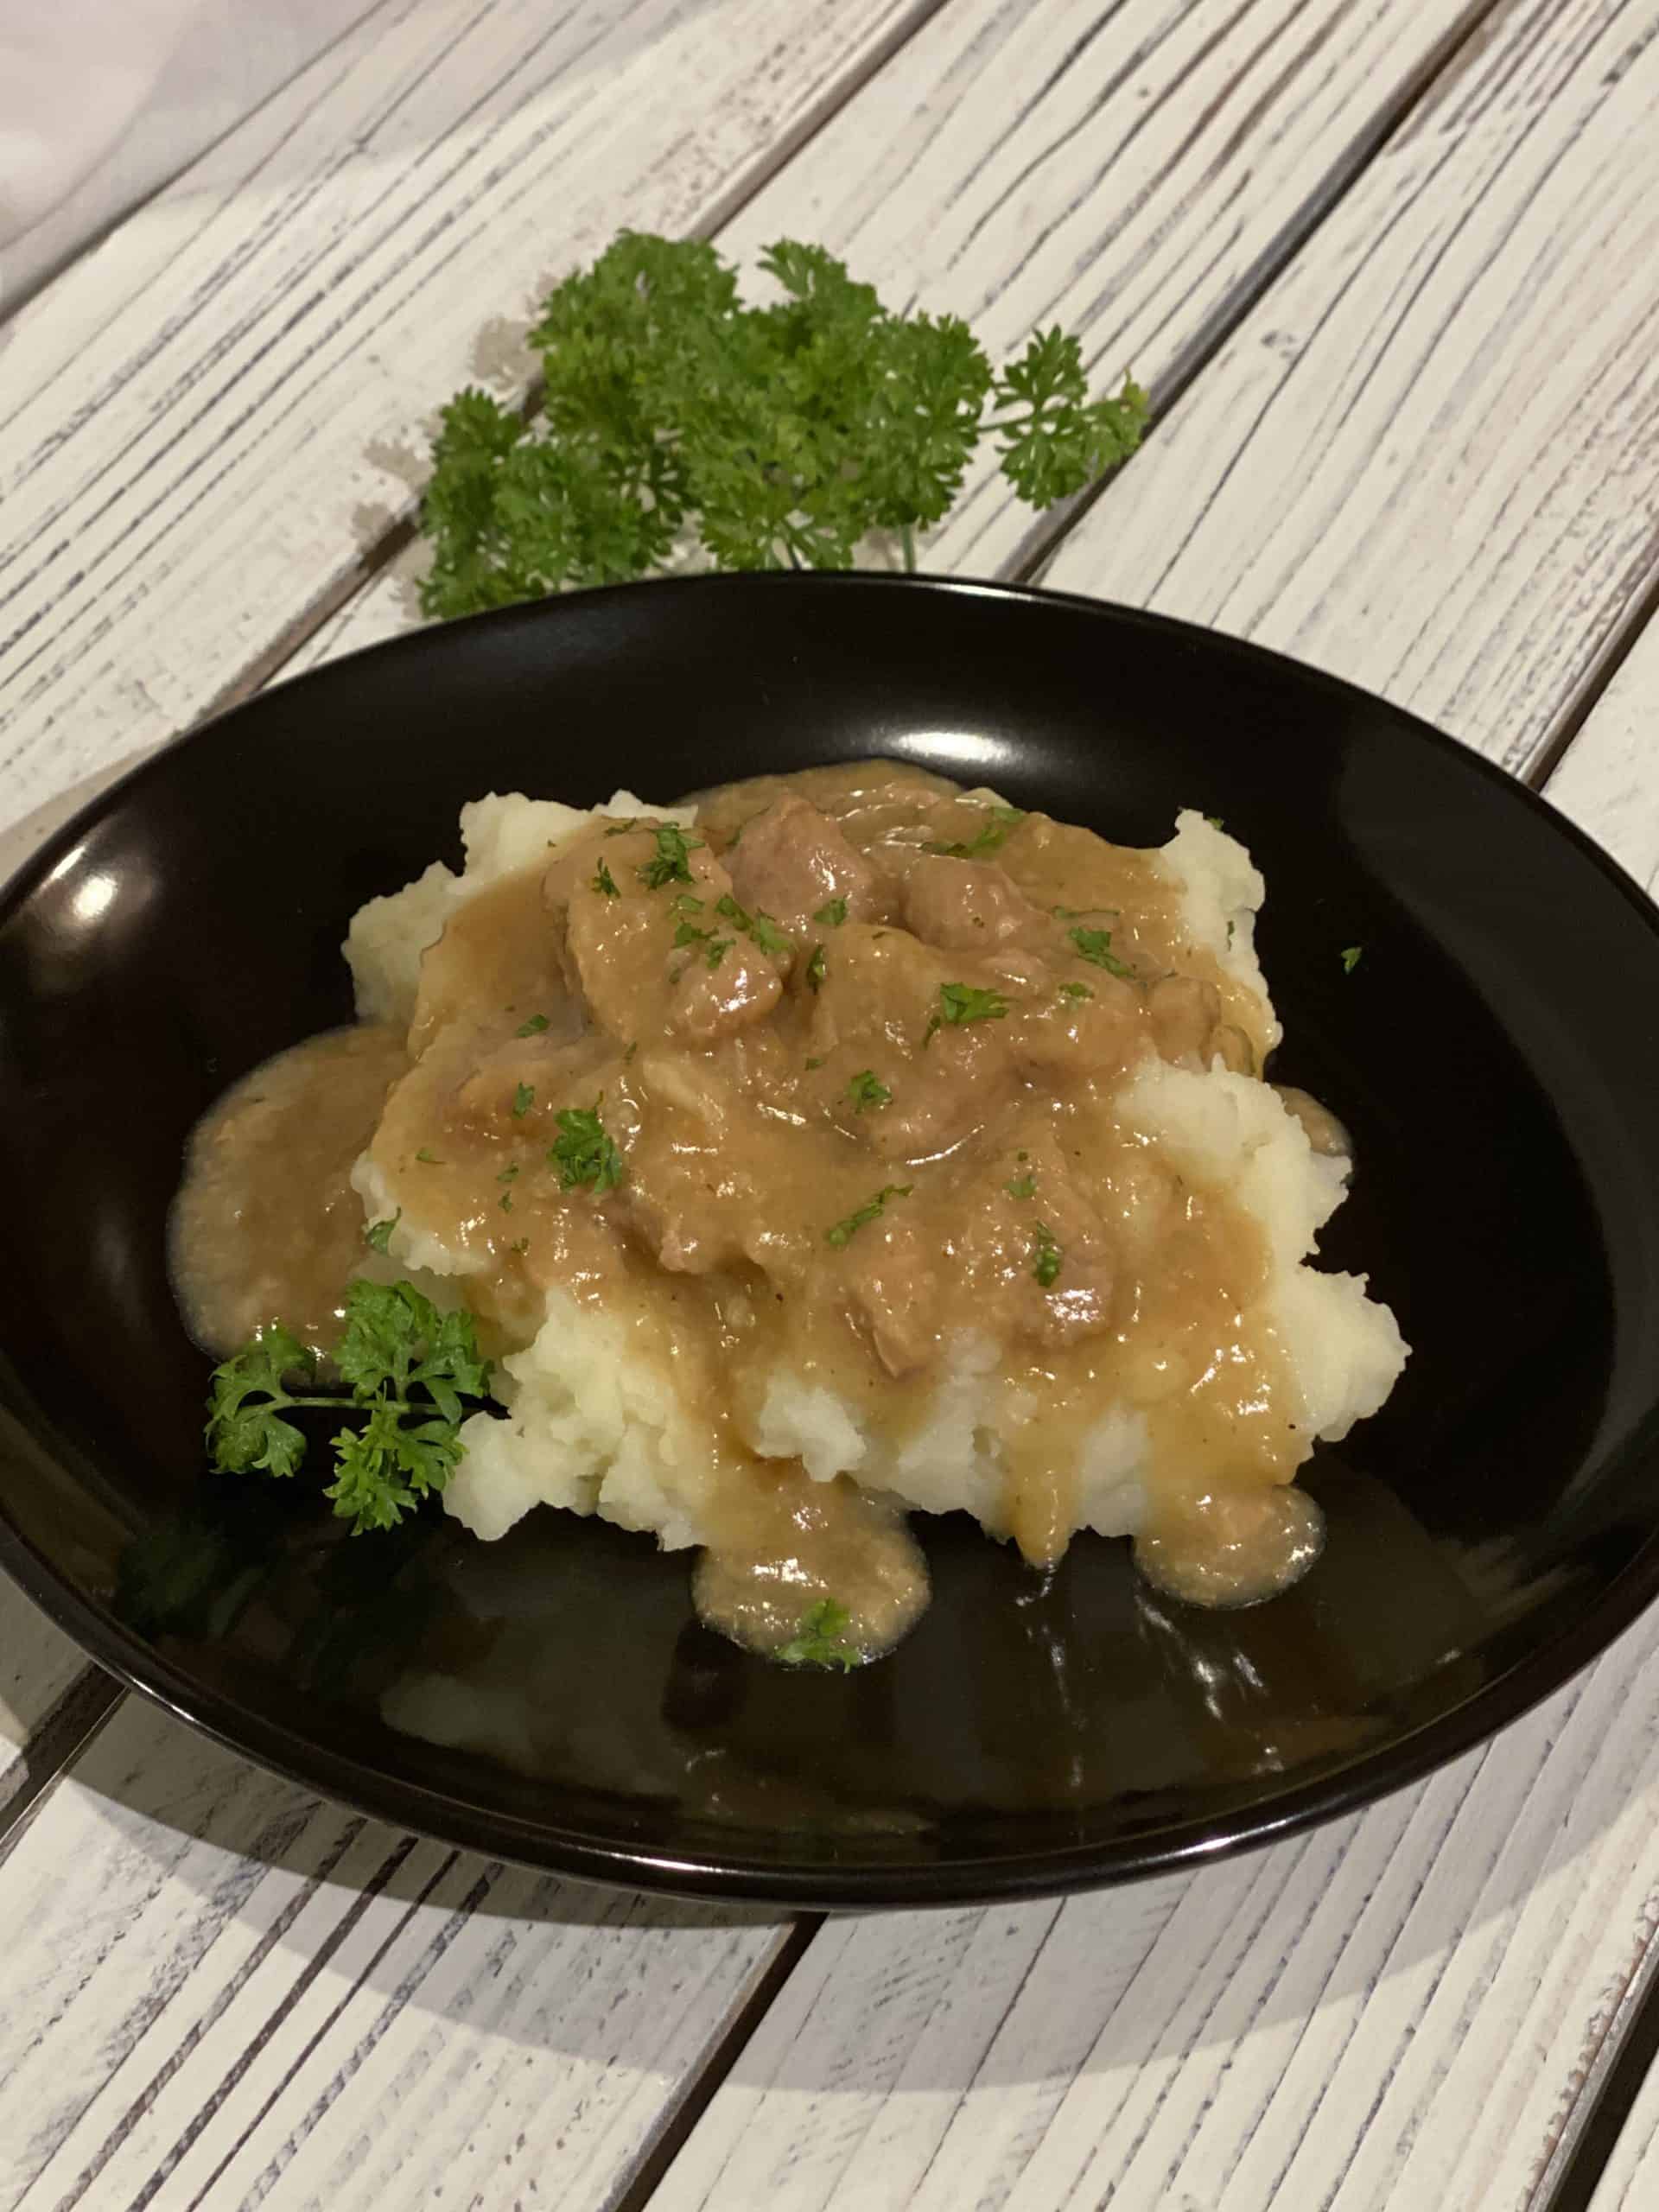 Tender Pork with Mashed Potatoes and Gravy